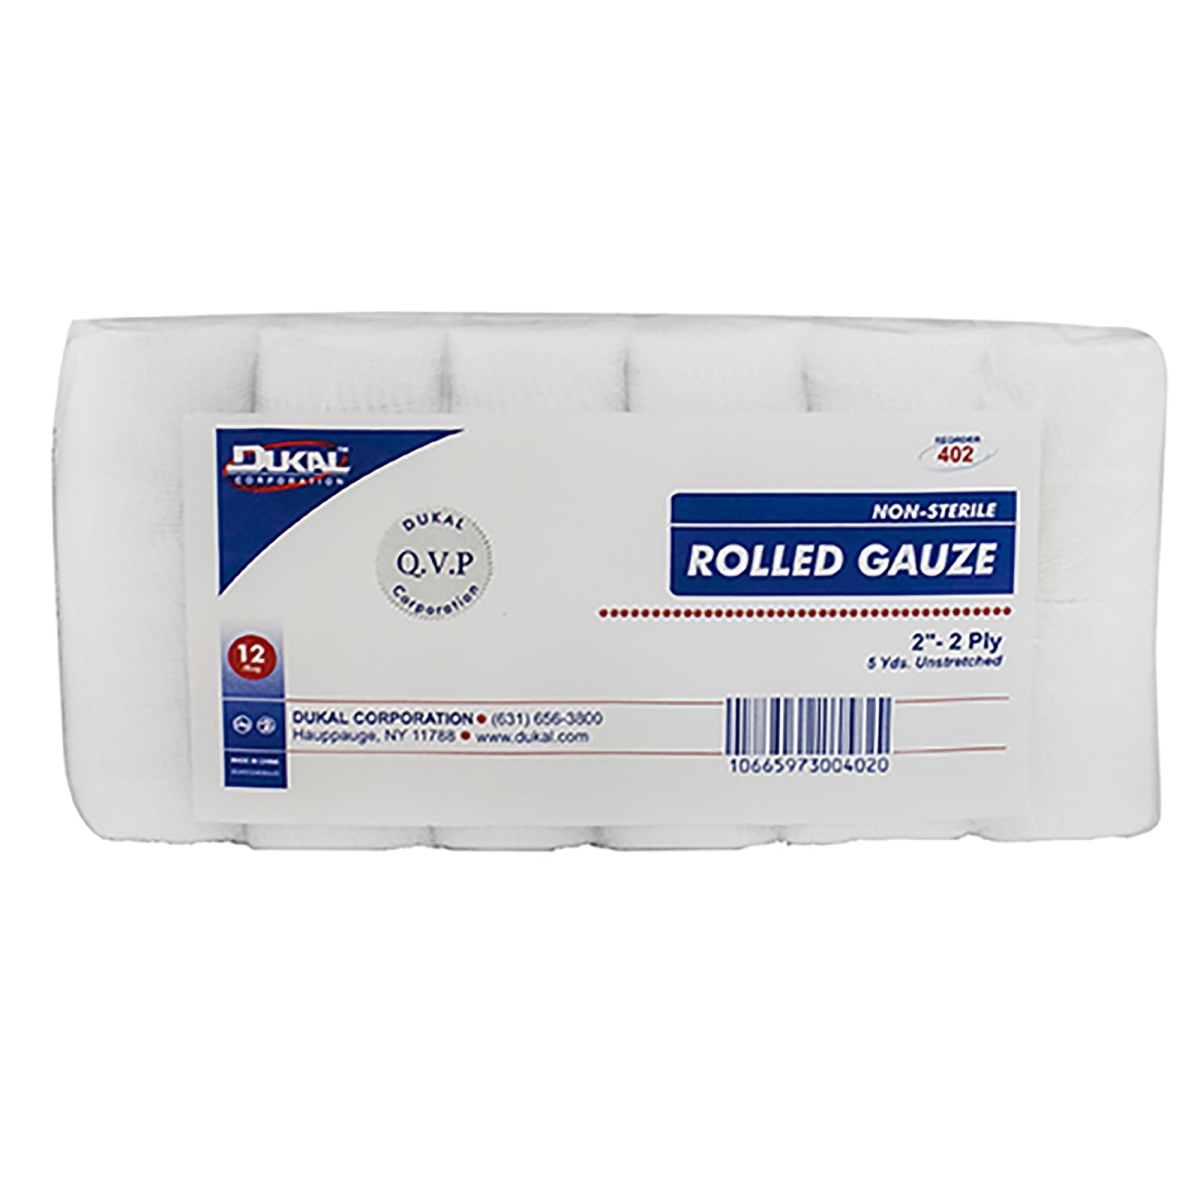 Picture of Dukal 62512000 White 2 in. Non-Sterile 2-Ply Cotton Gauze Bandage Roll - Pack of 96